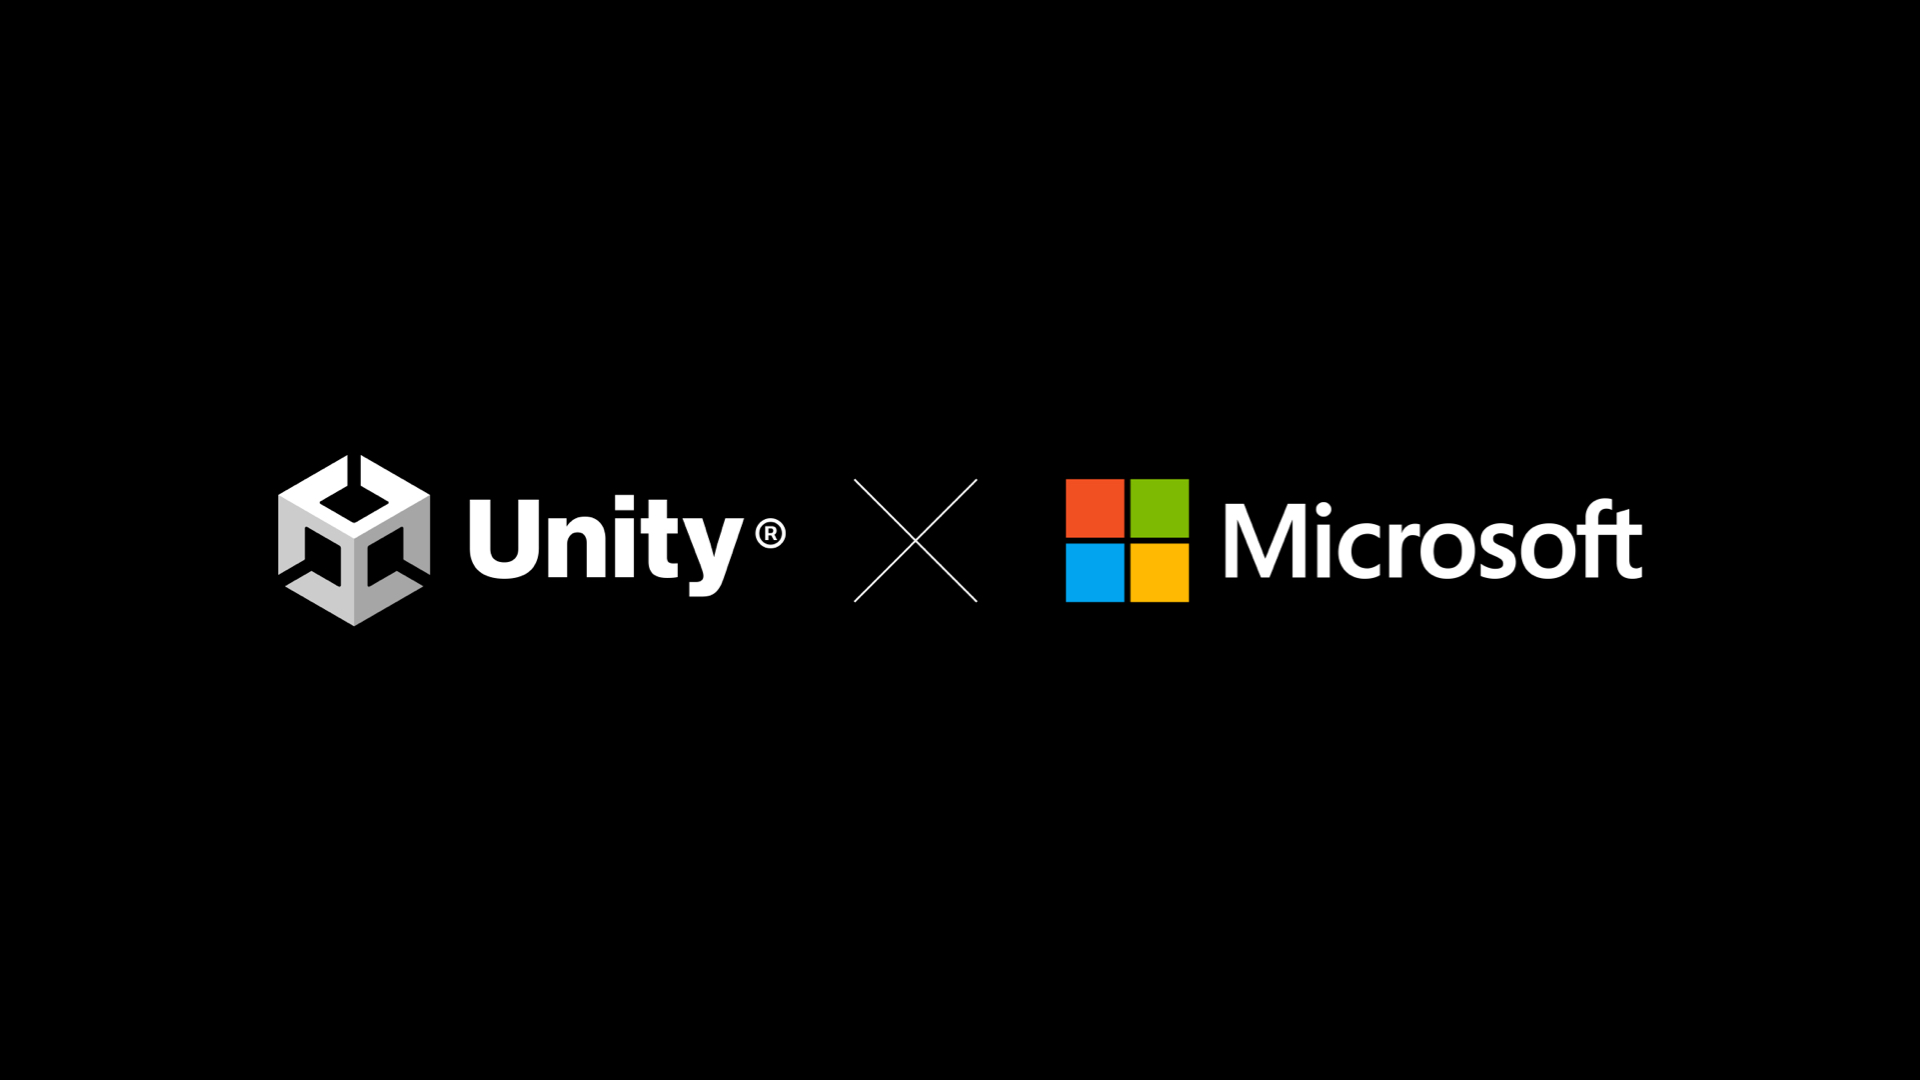 Microsoft and Unity Partner to Empower Digital Creators, 3D Artists,
and Game Developers Globally